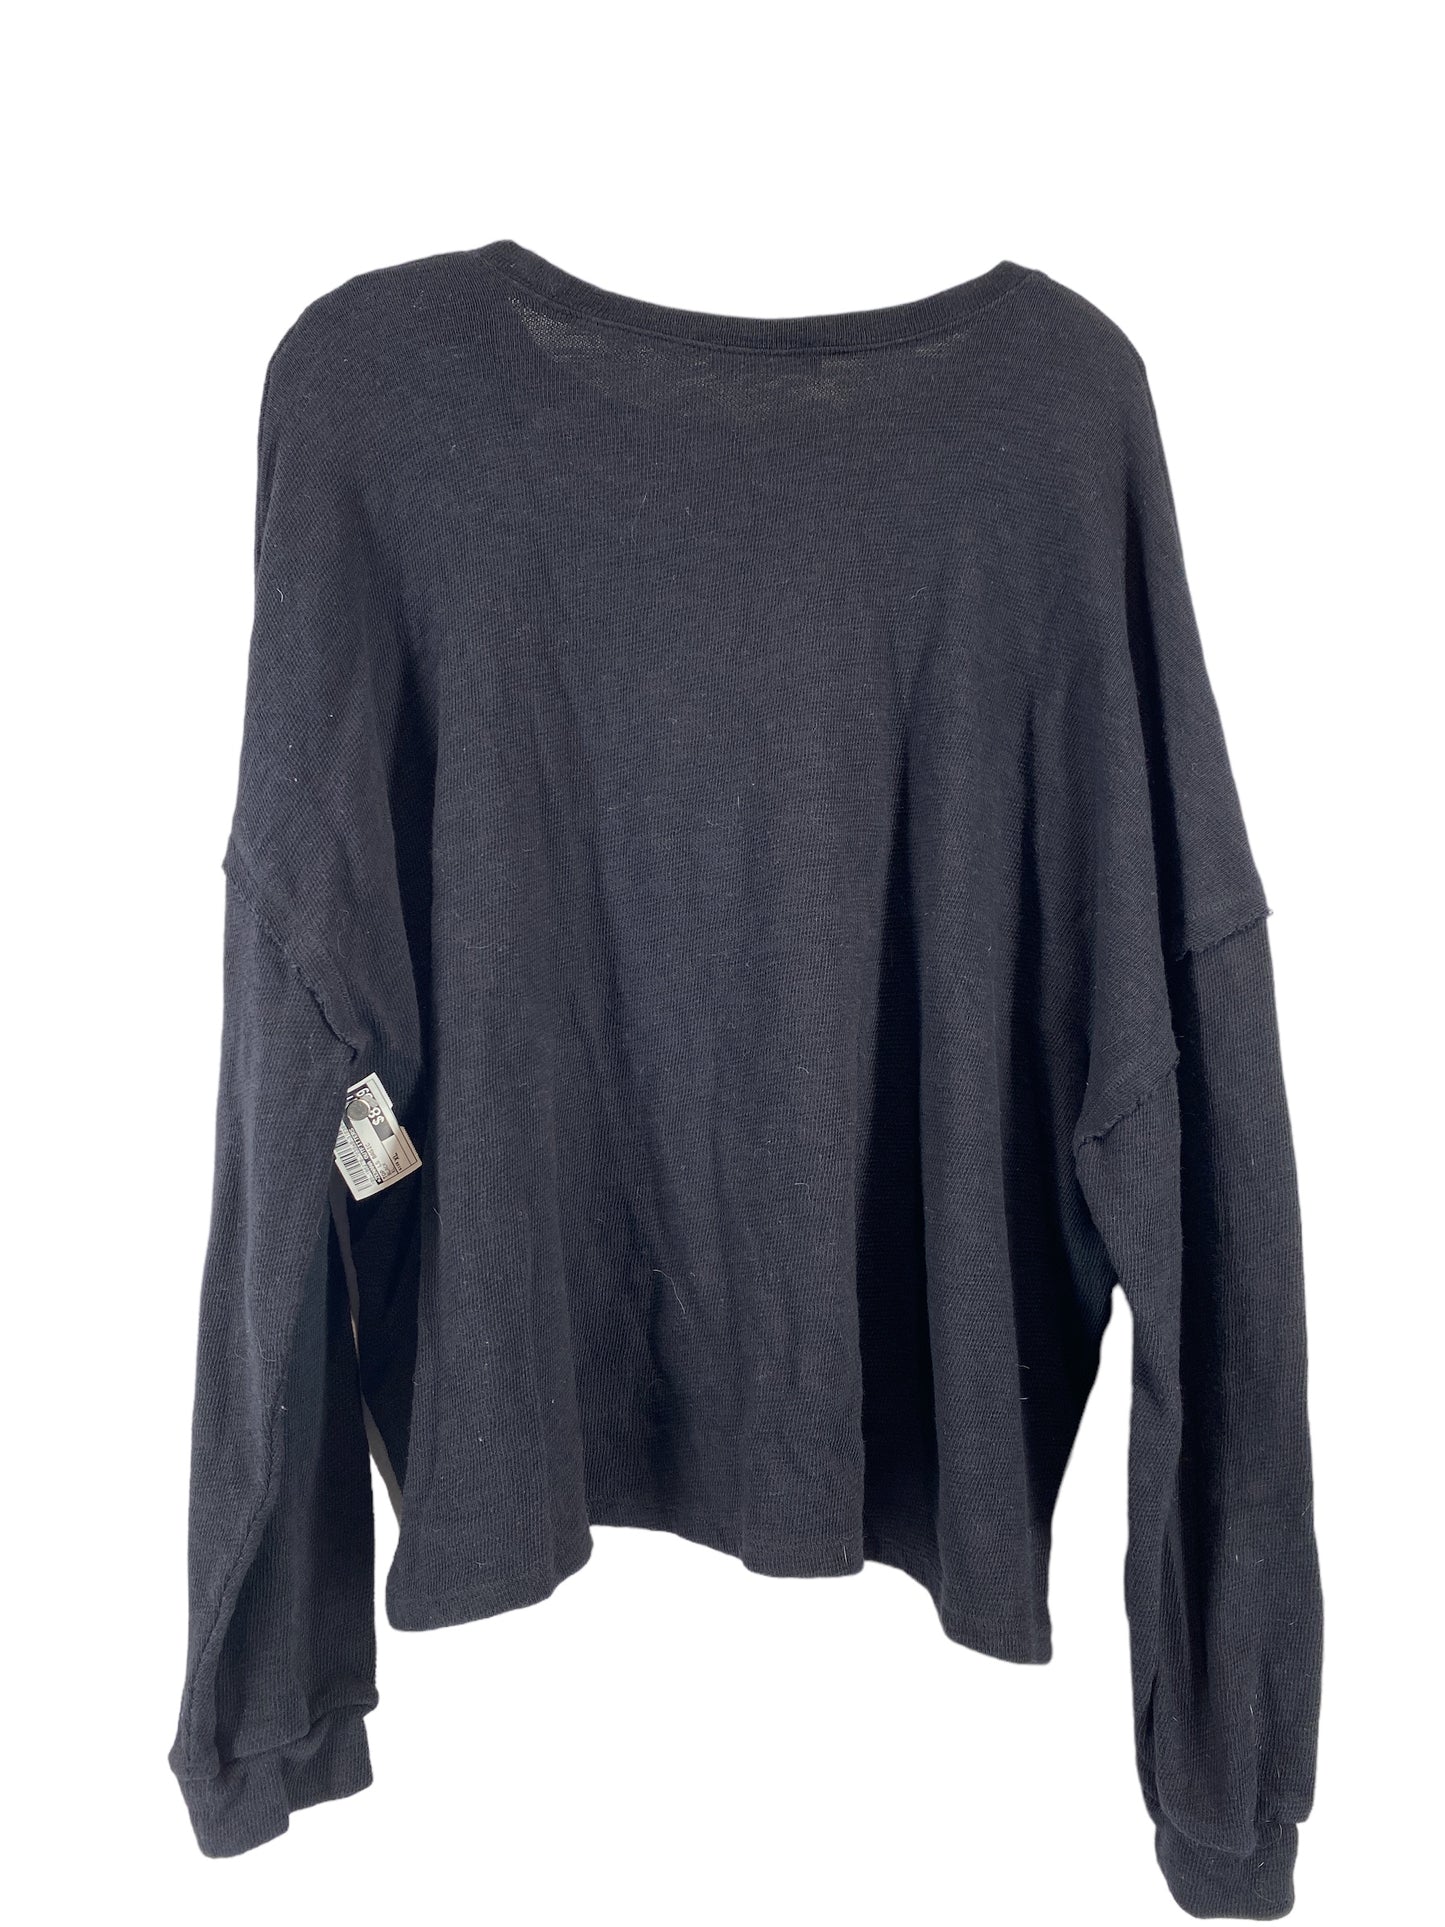 Top Long Sleeve Basic By Zenana Outfitters  Size: Xl